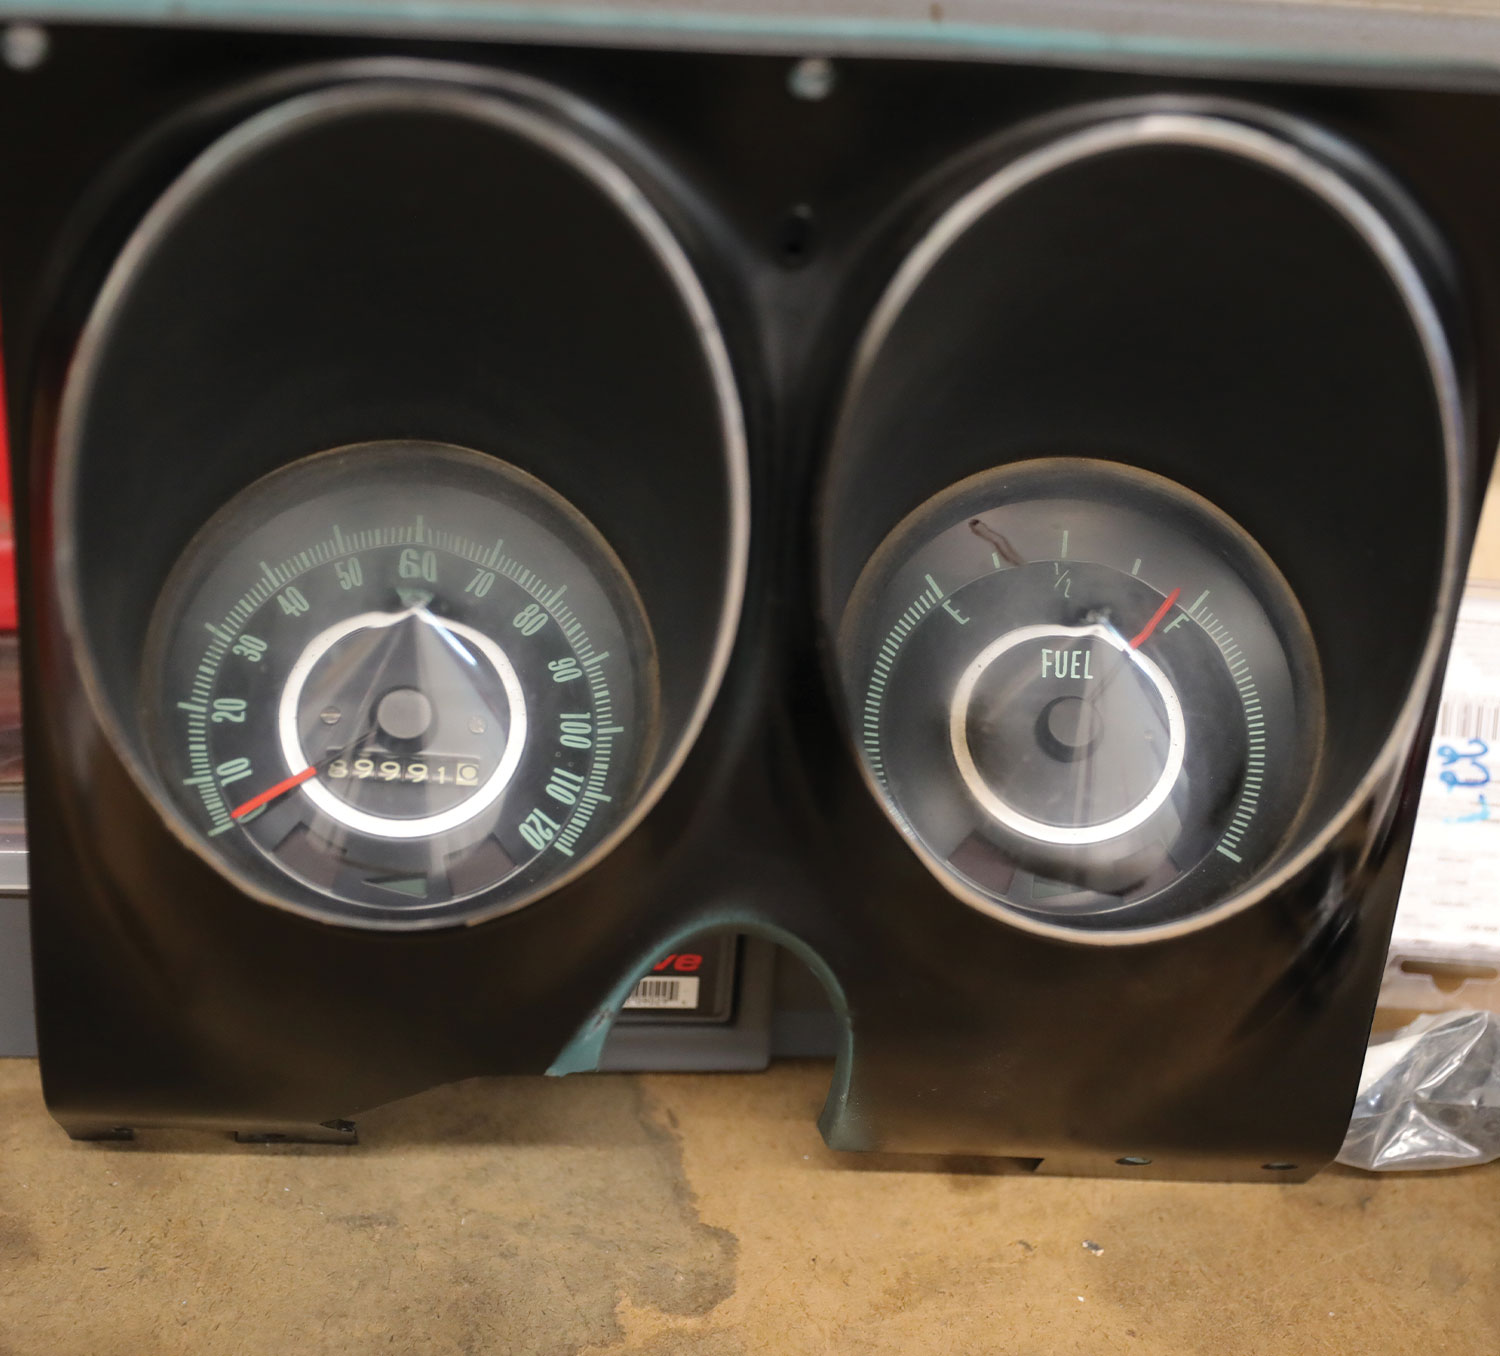 the old, removed factory gauges reading only speed and fuel level